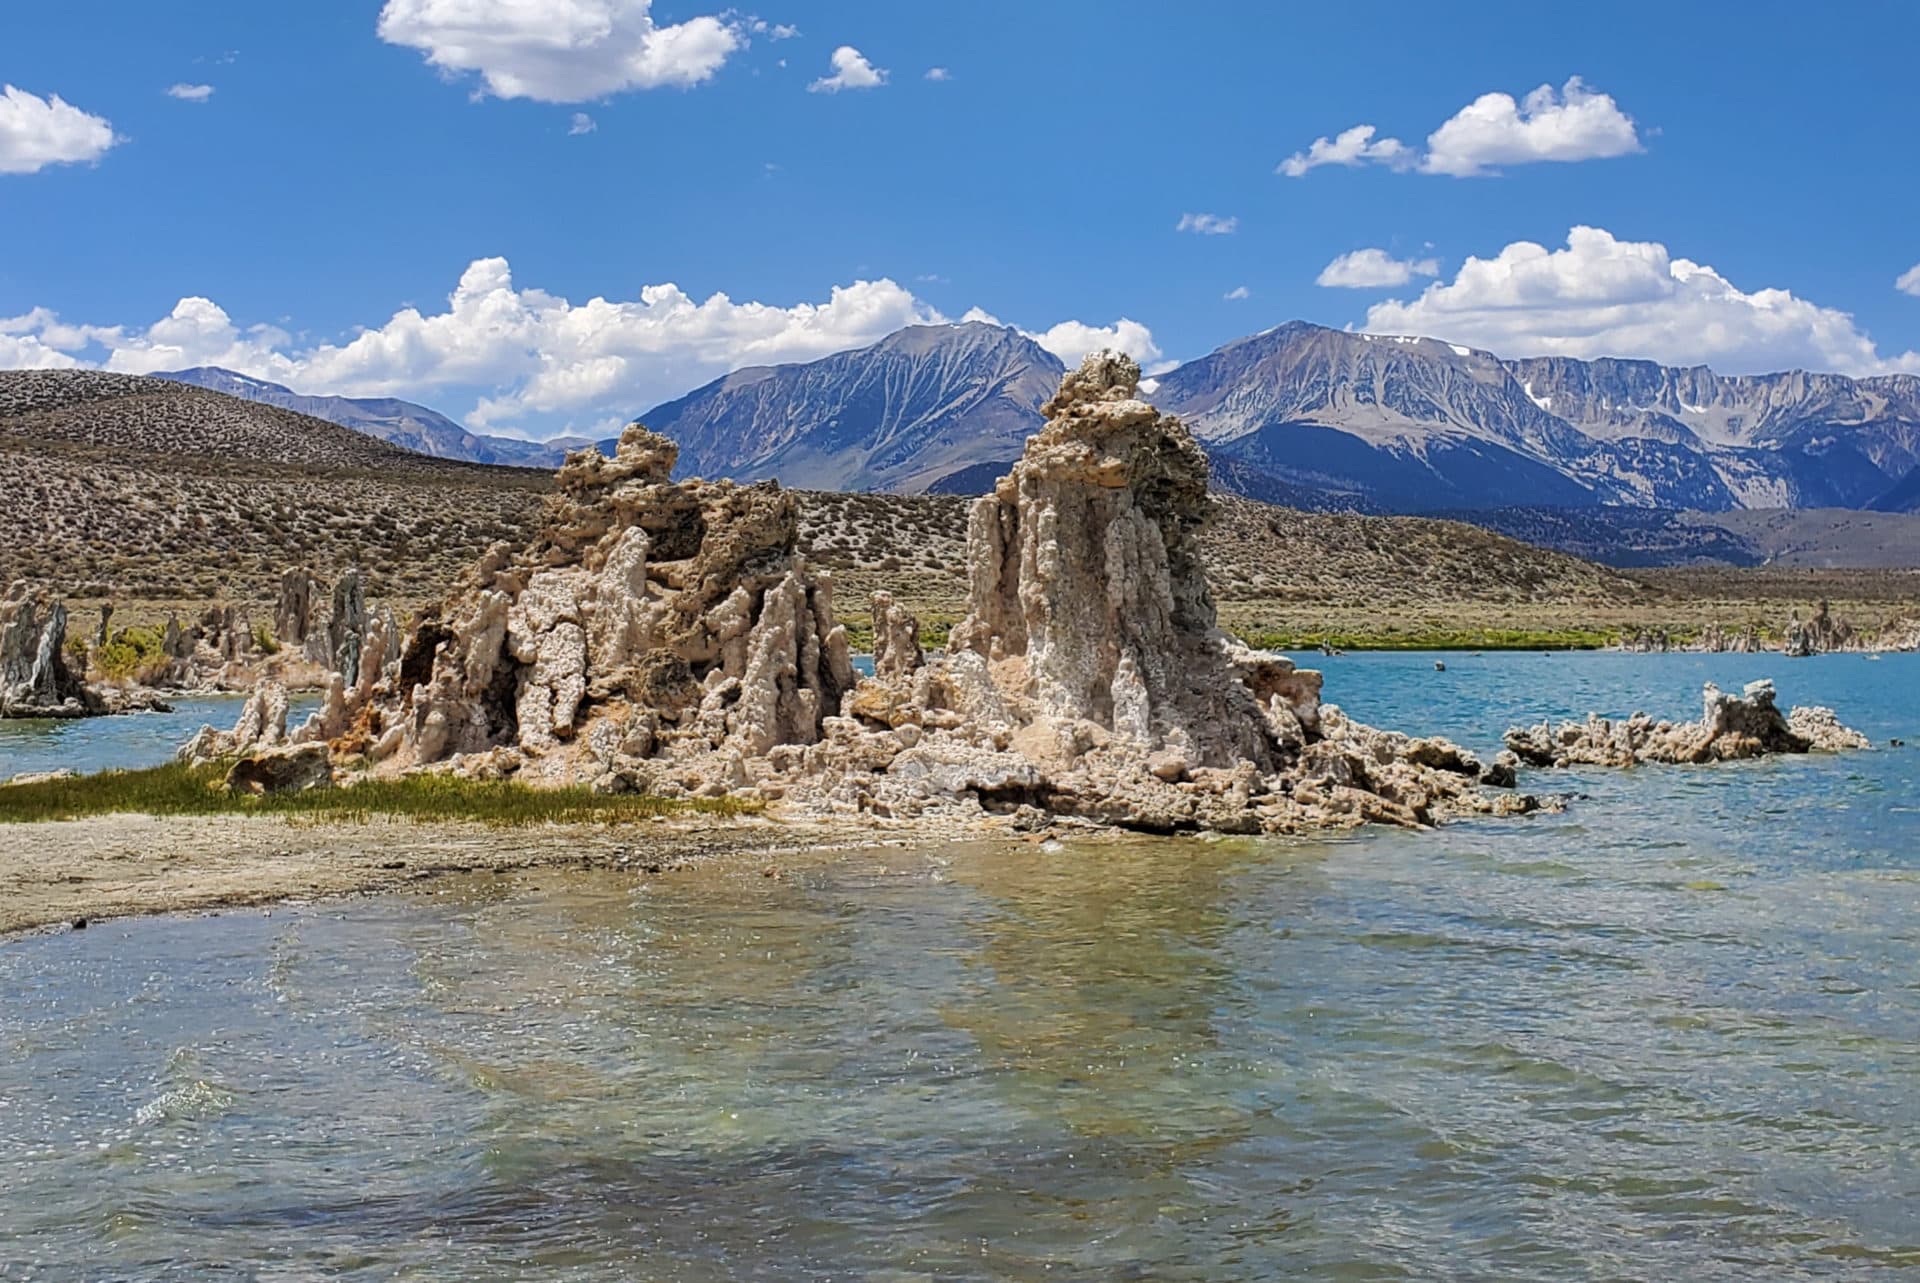 Tufas perched at the water's edge, while the Eastern Sierra Nevadas look on